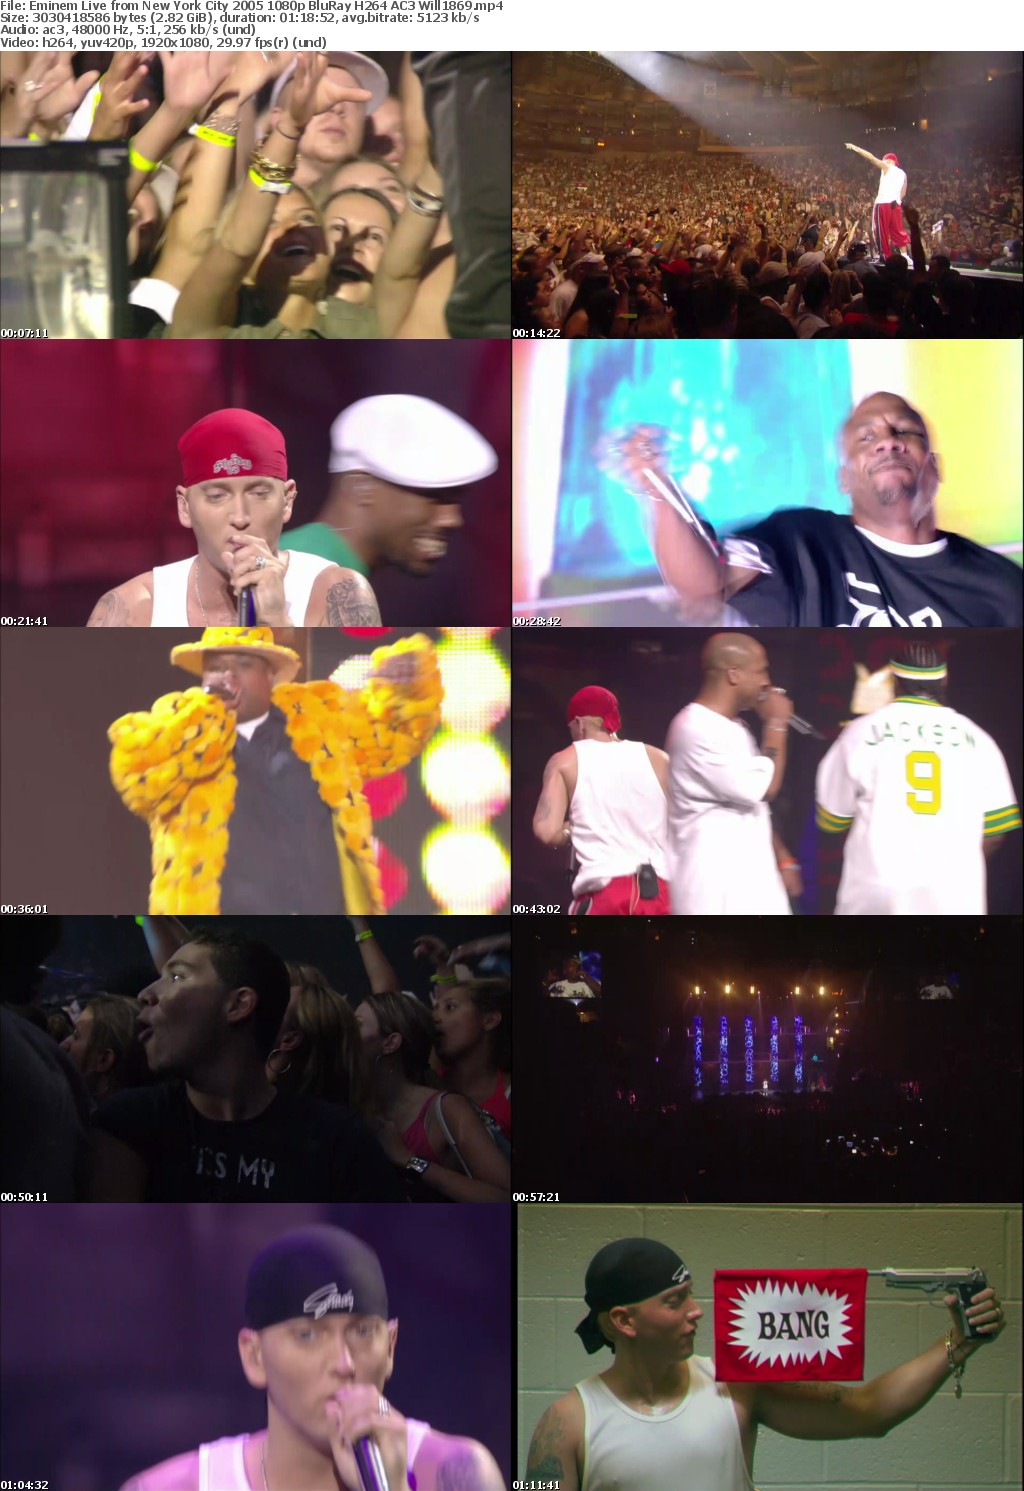 Eminem Live from New York City 2005 1080p BluRay H264 AC3 Will1869 mp4